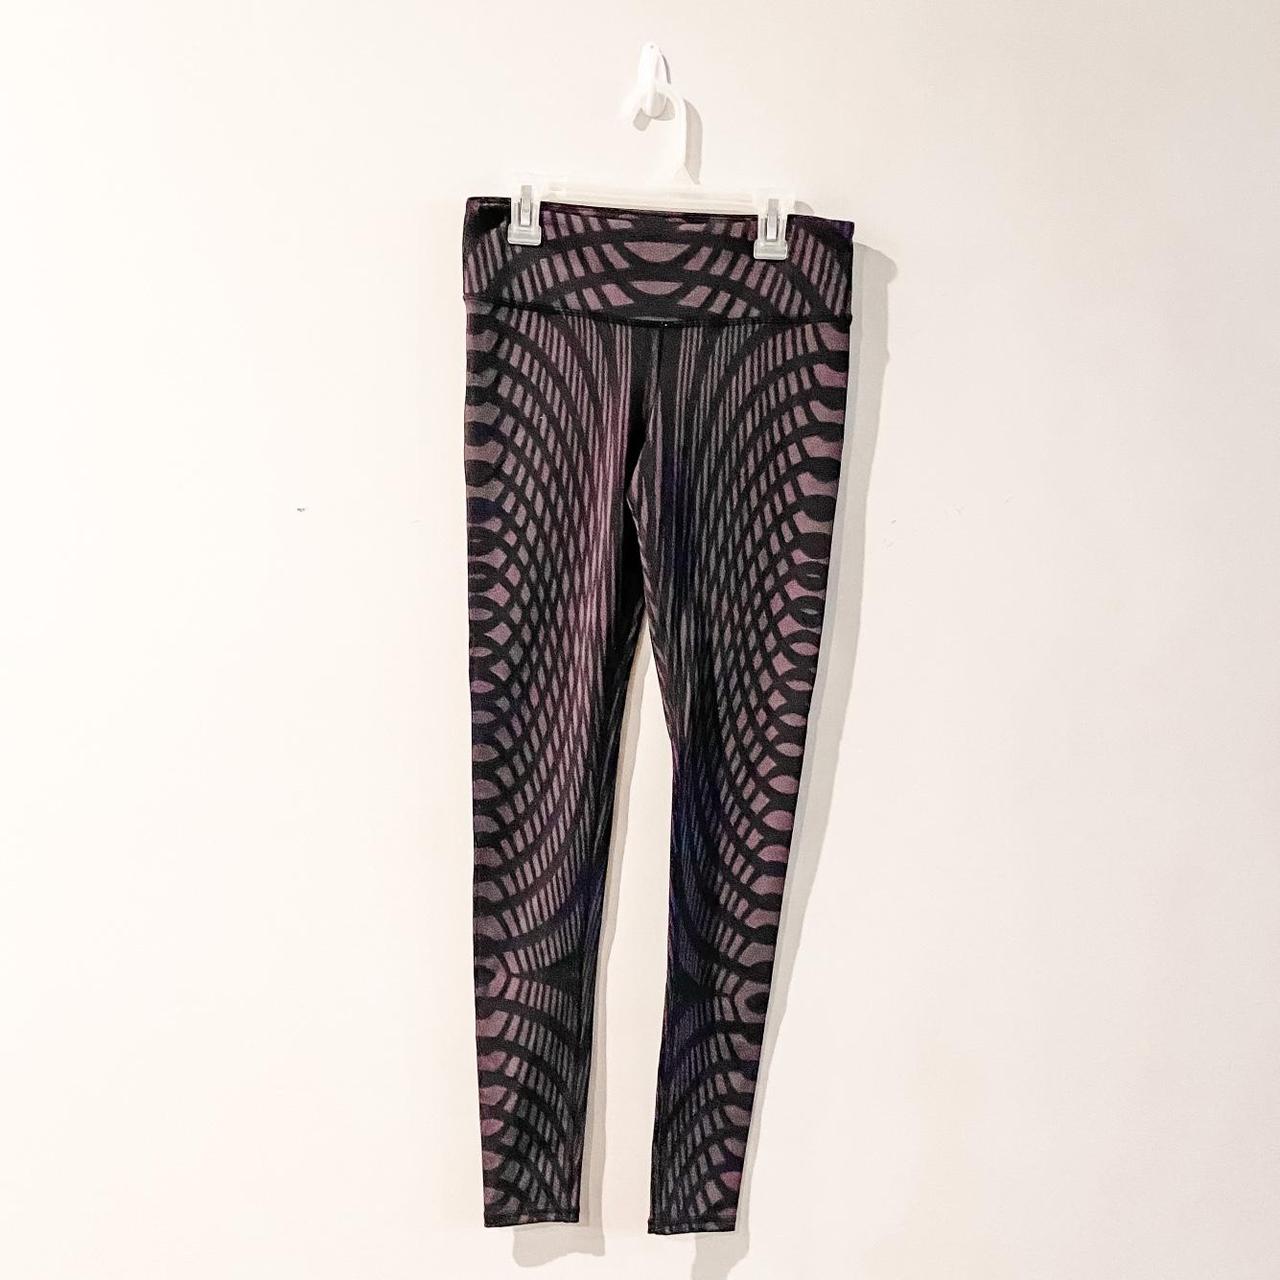 Product Image 1 - Alo Yoga Leggings
Size small
Great preowned